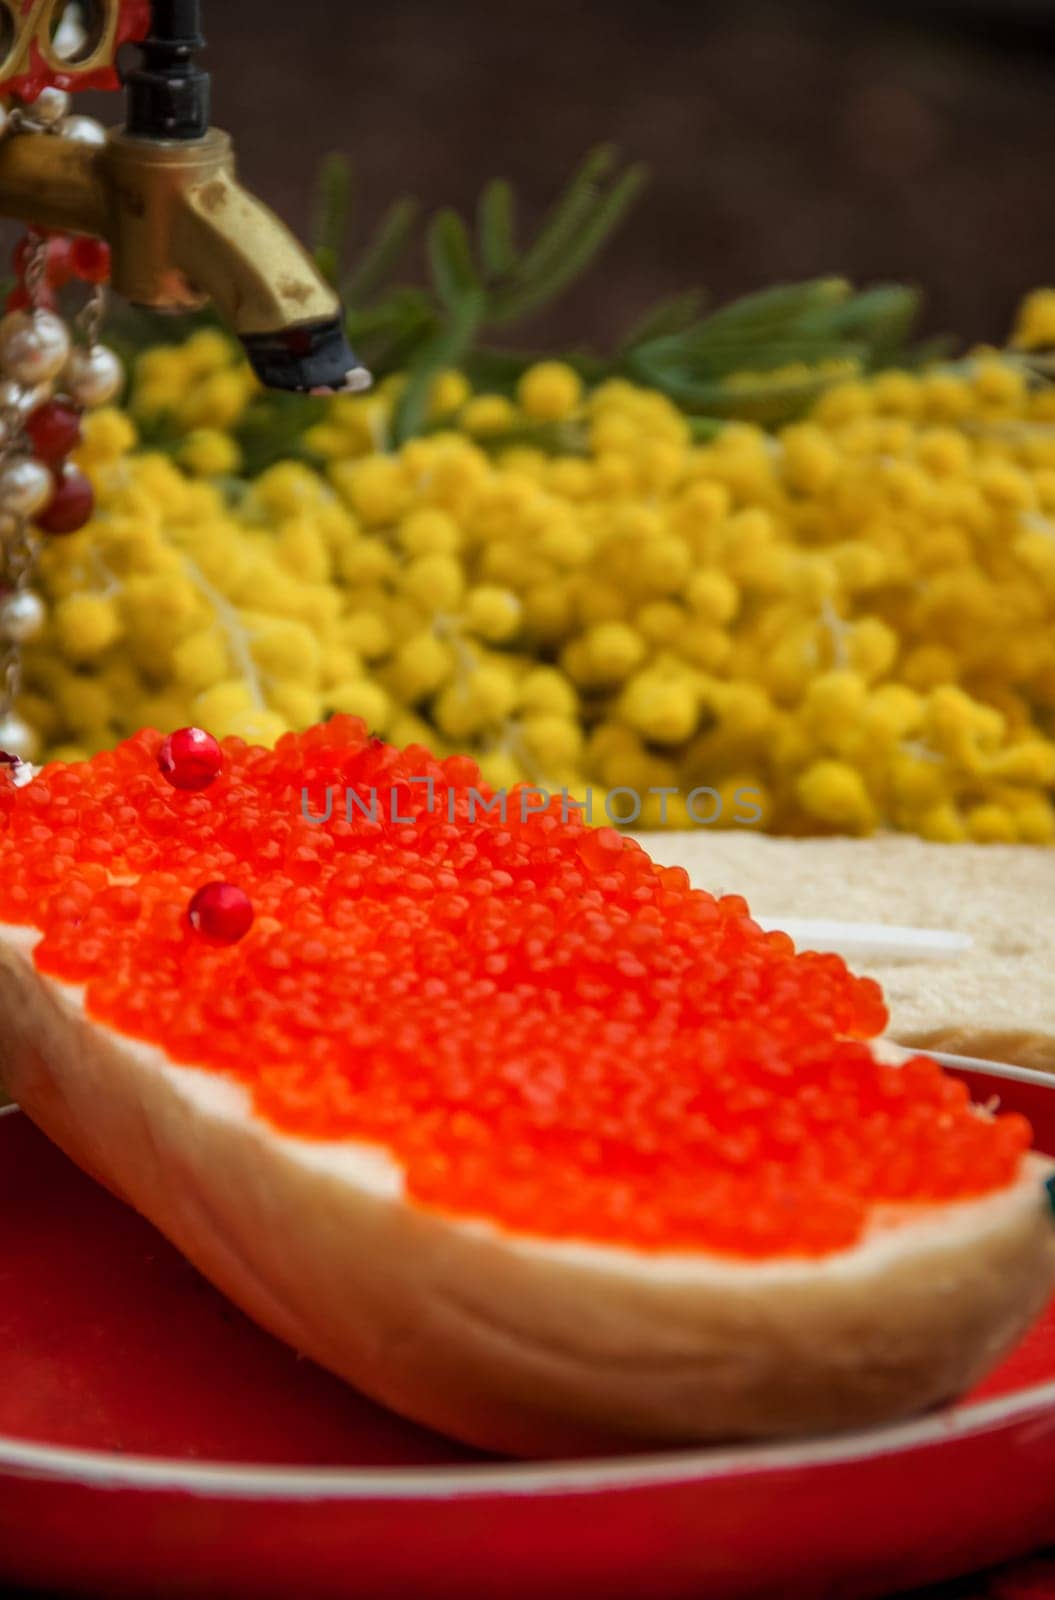 Red caviar is spread on bread with a thick layer. Maslenitsa street fair. Outdoor food